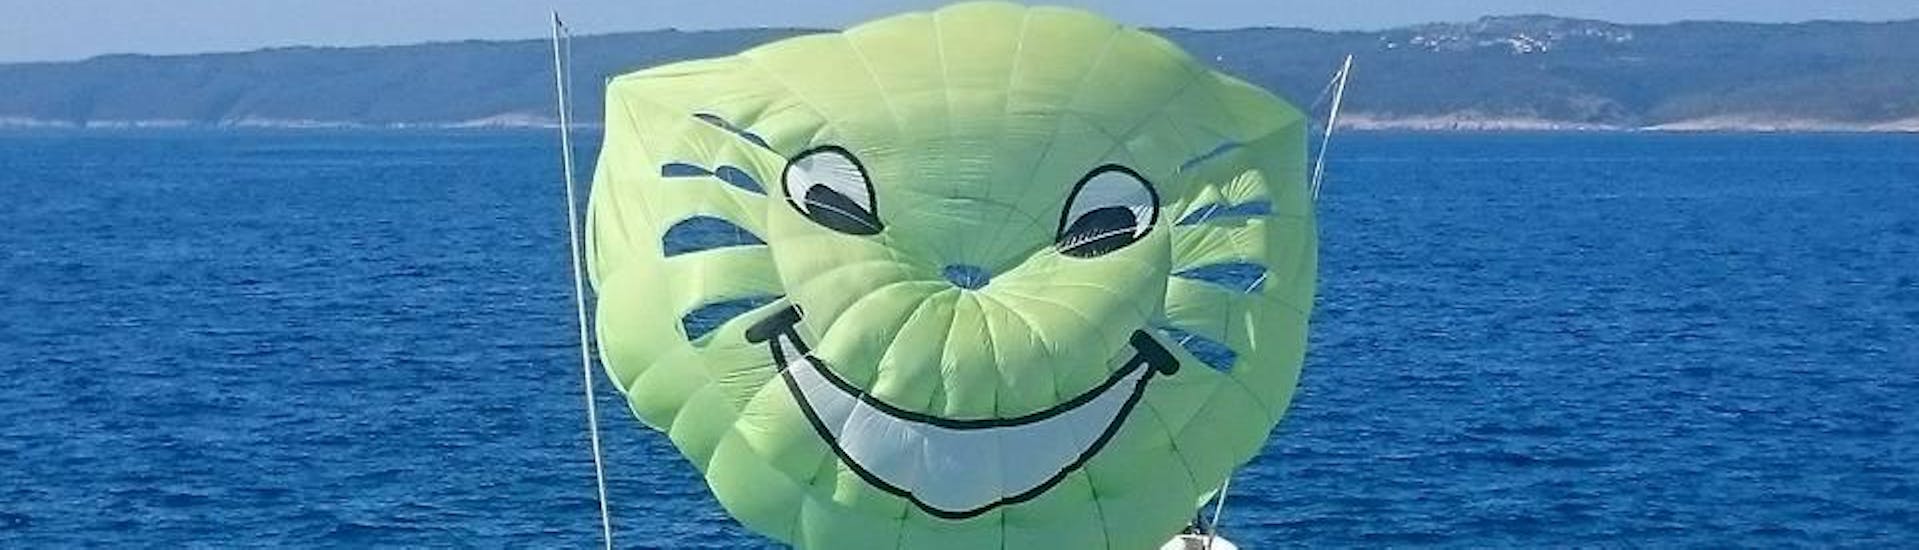 Duo Parasailing in Kvarner Bay with Water Sport Centar Selce.